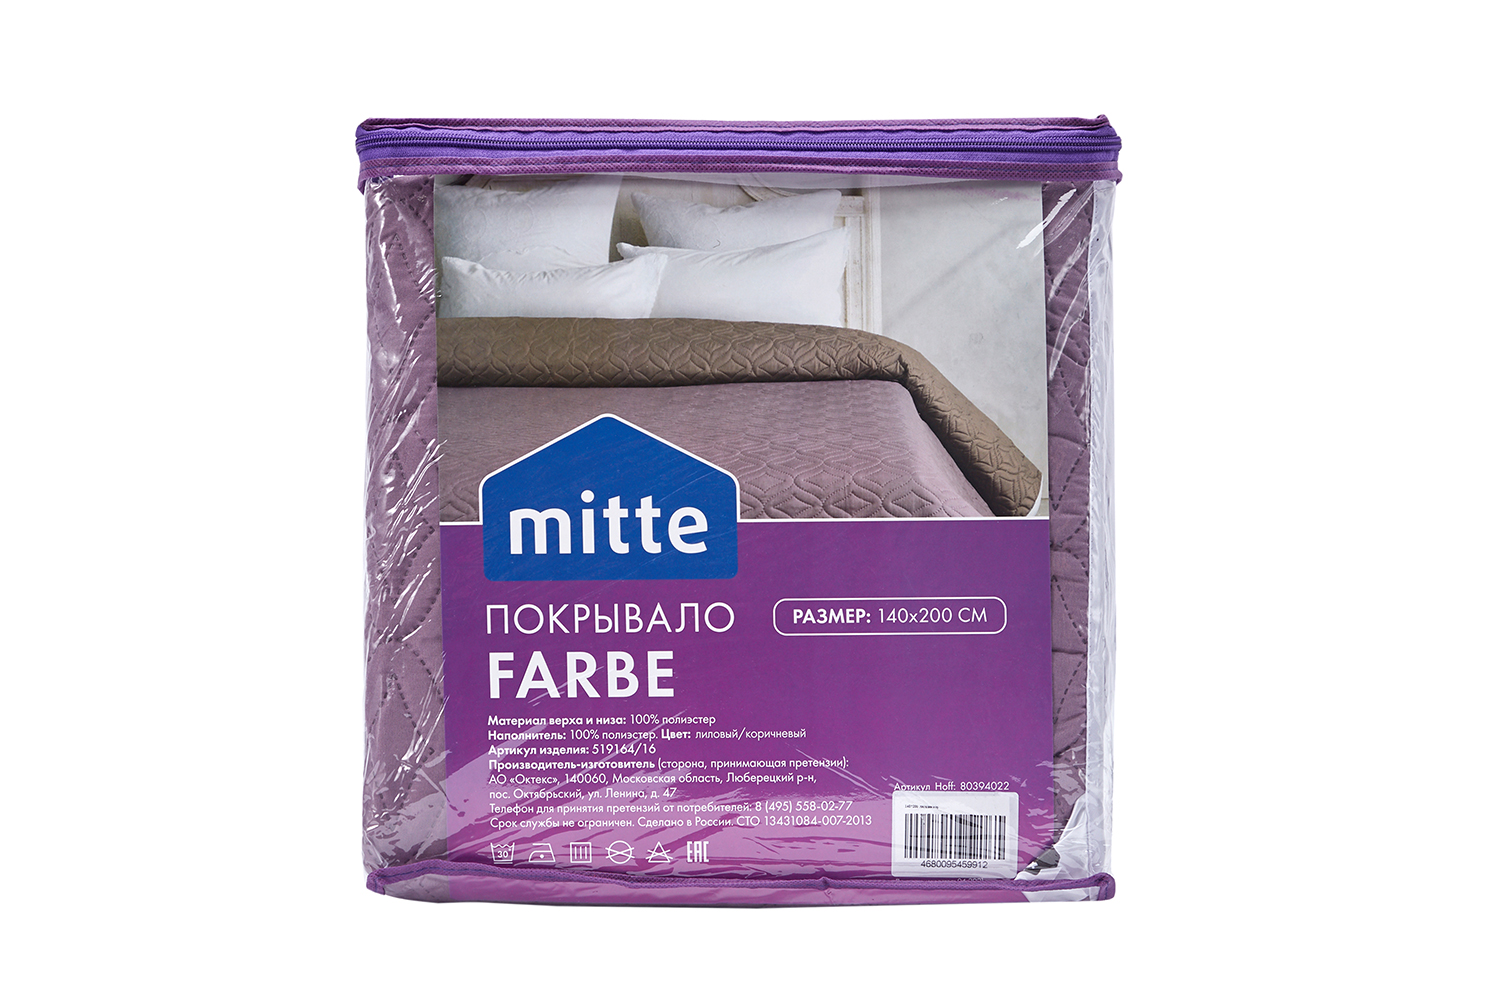 фото Покрывало farbe mitte